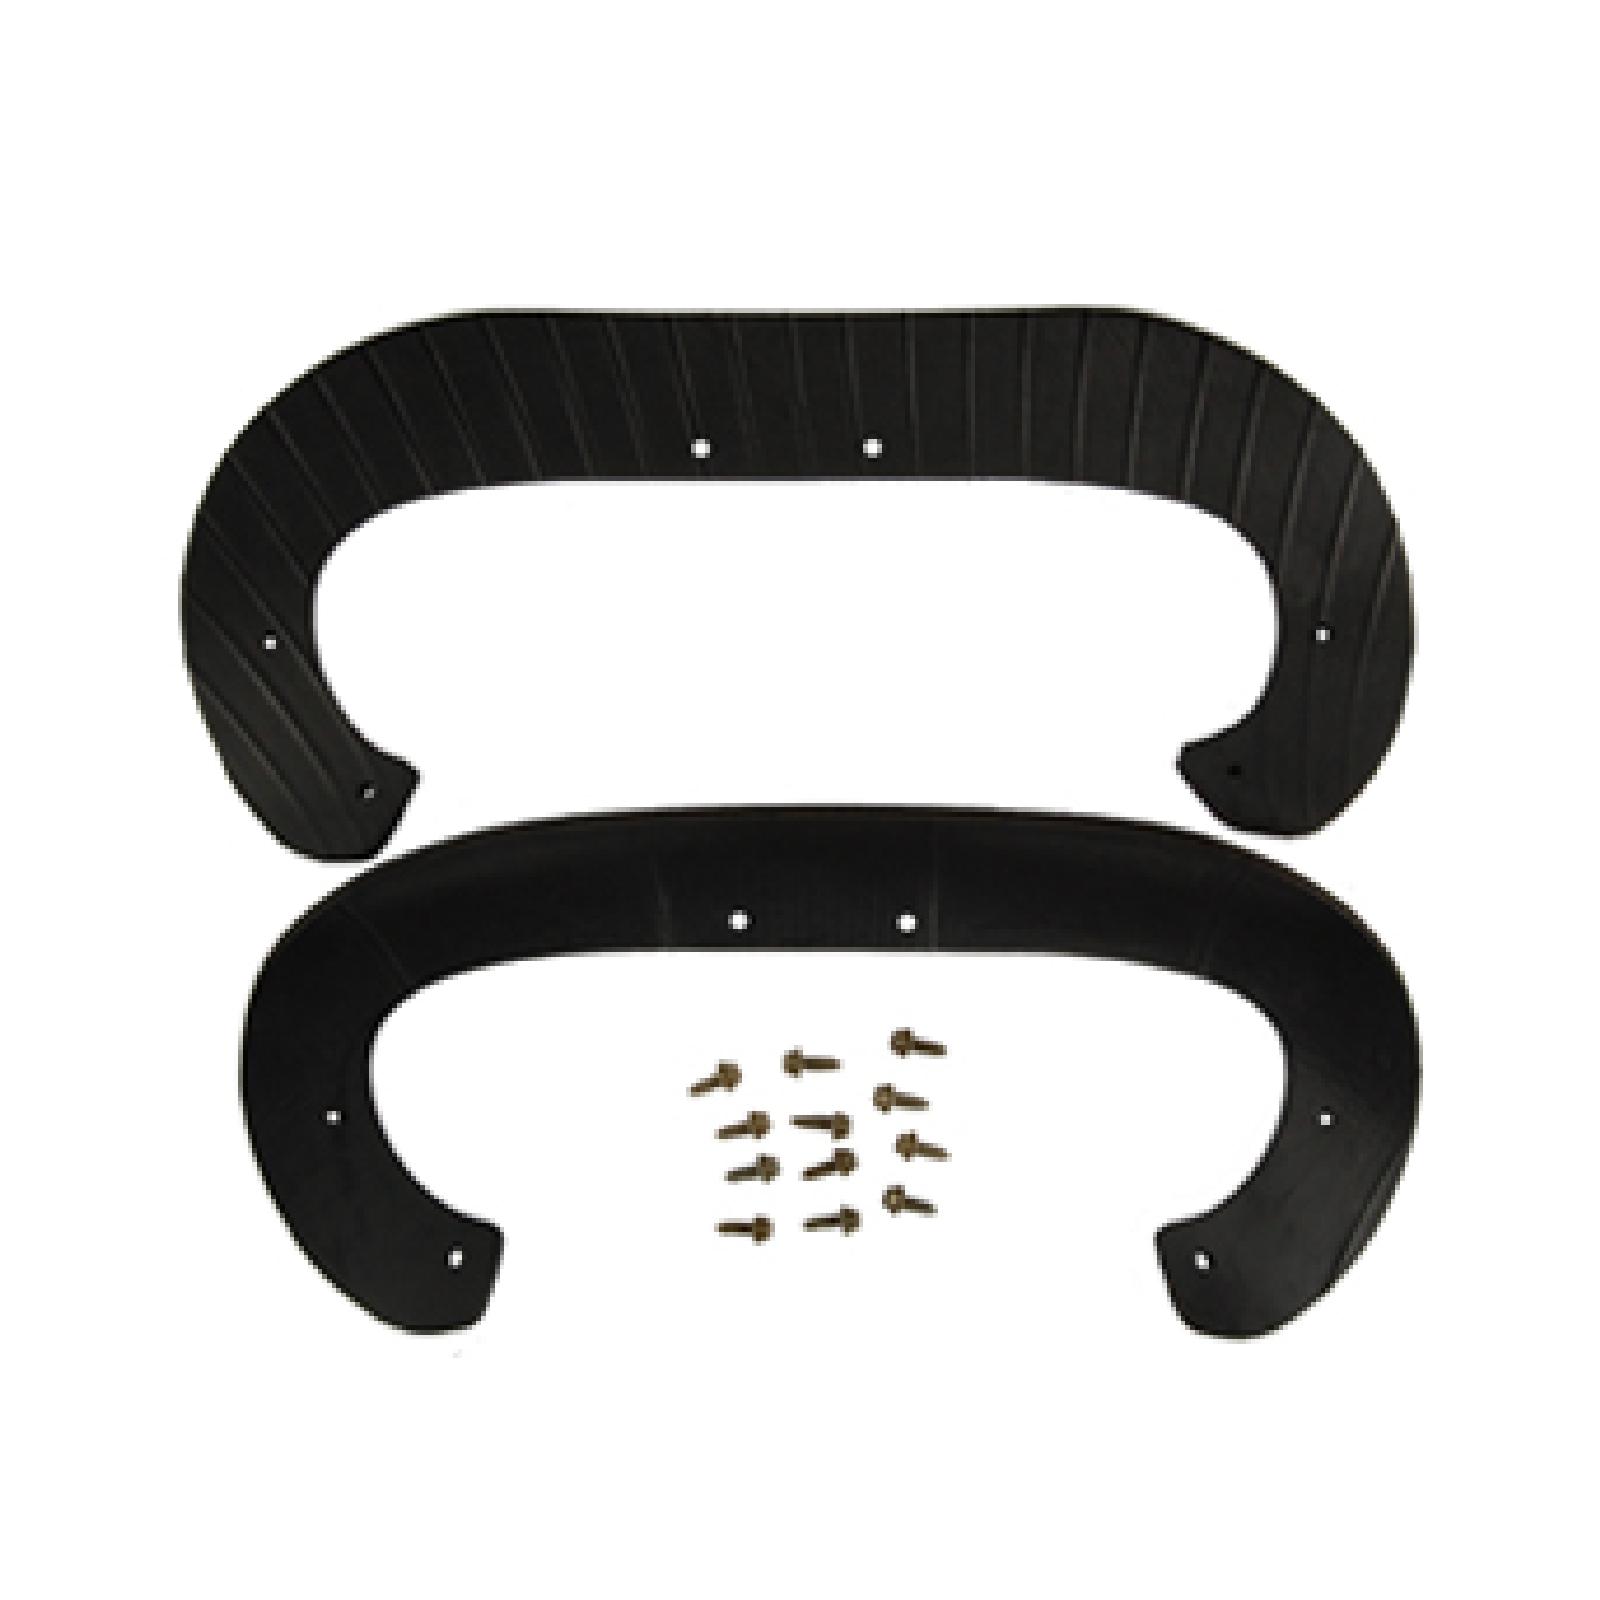 PADDLE KIT RUBBER part# 753-06469 by MTD